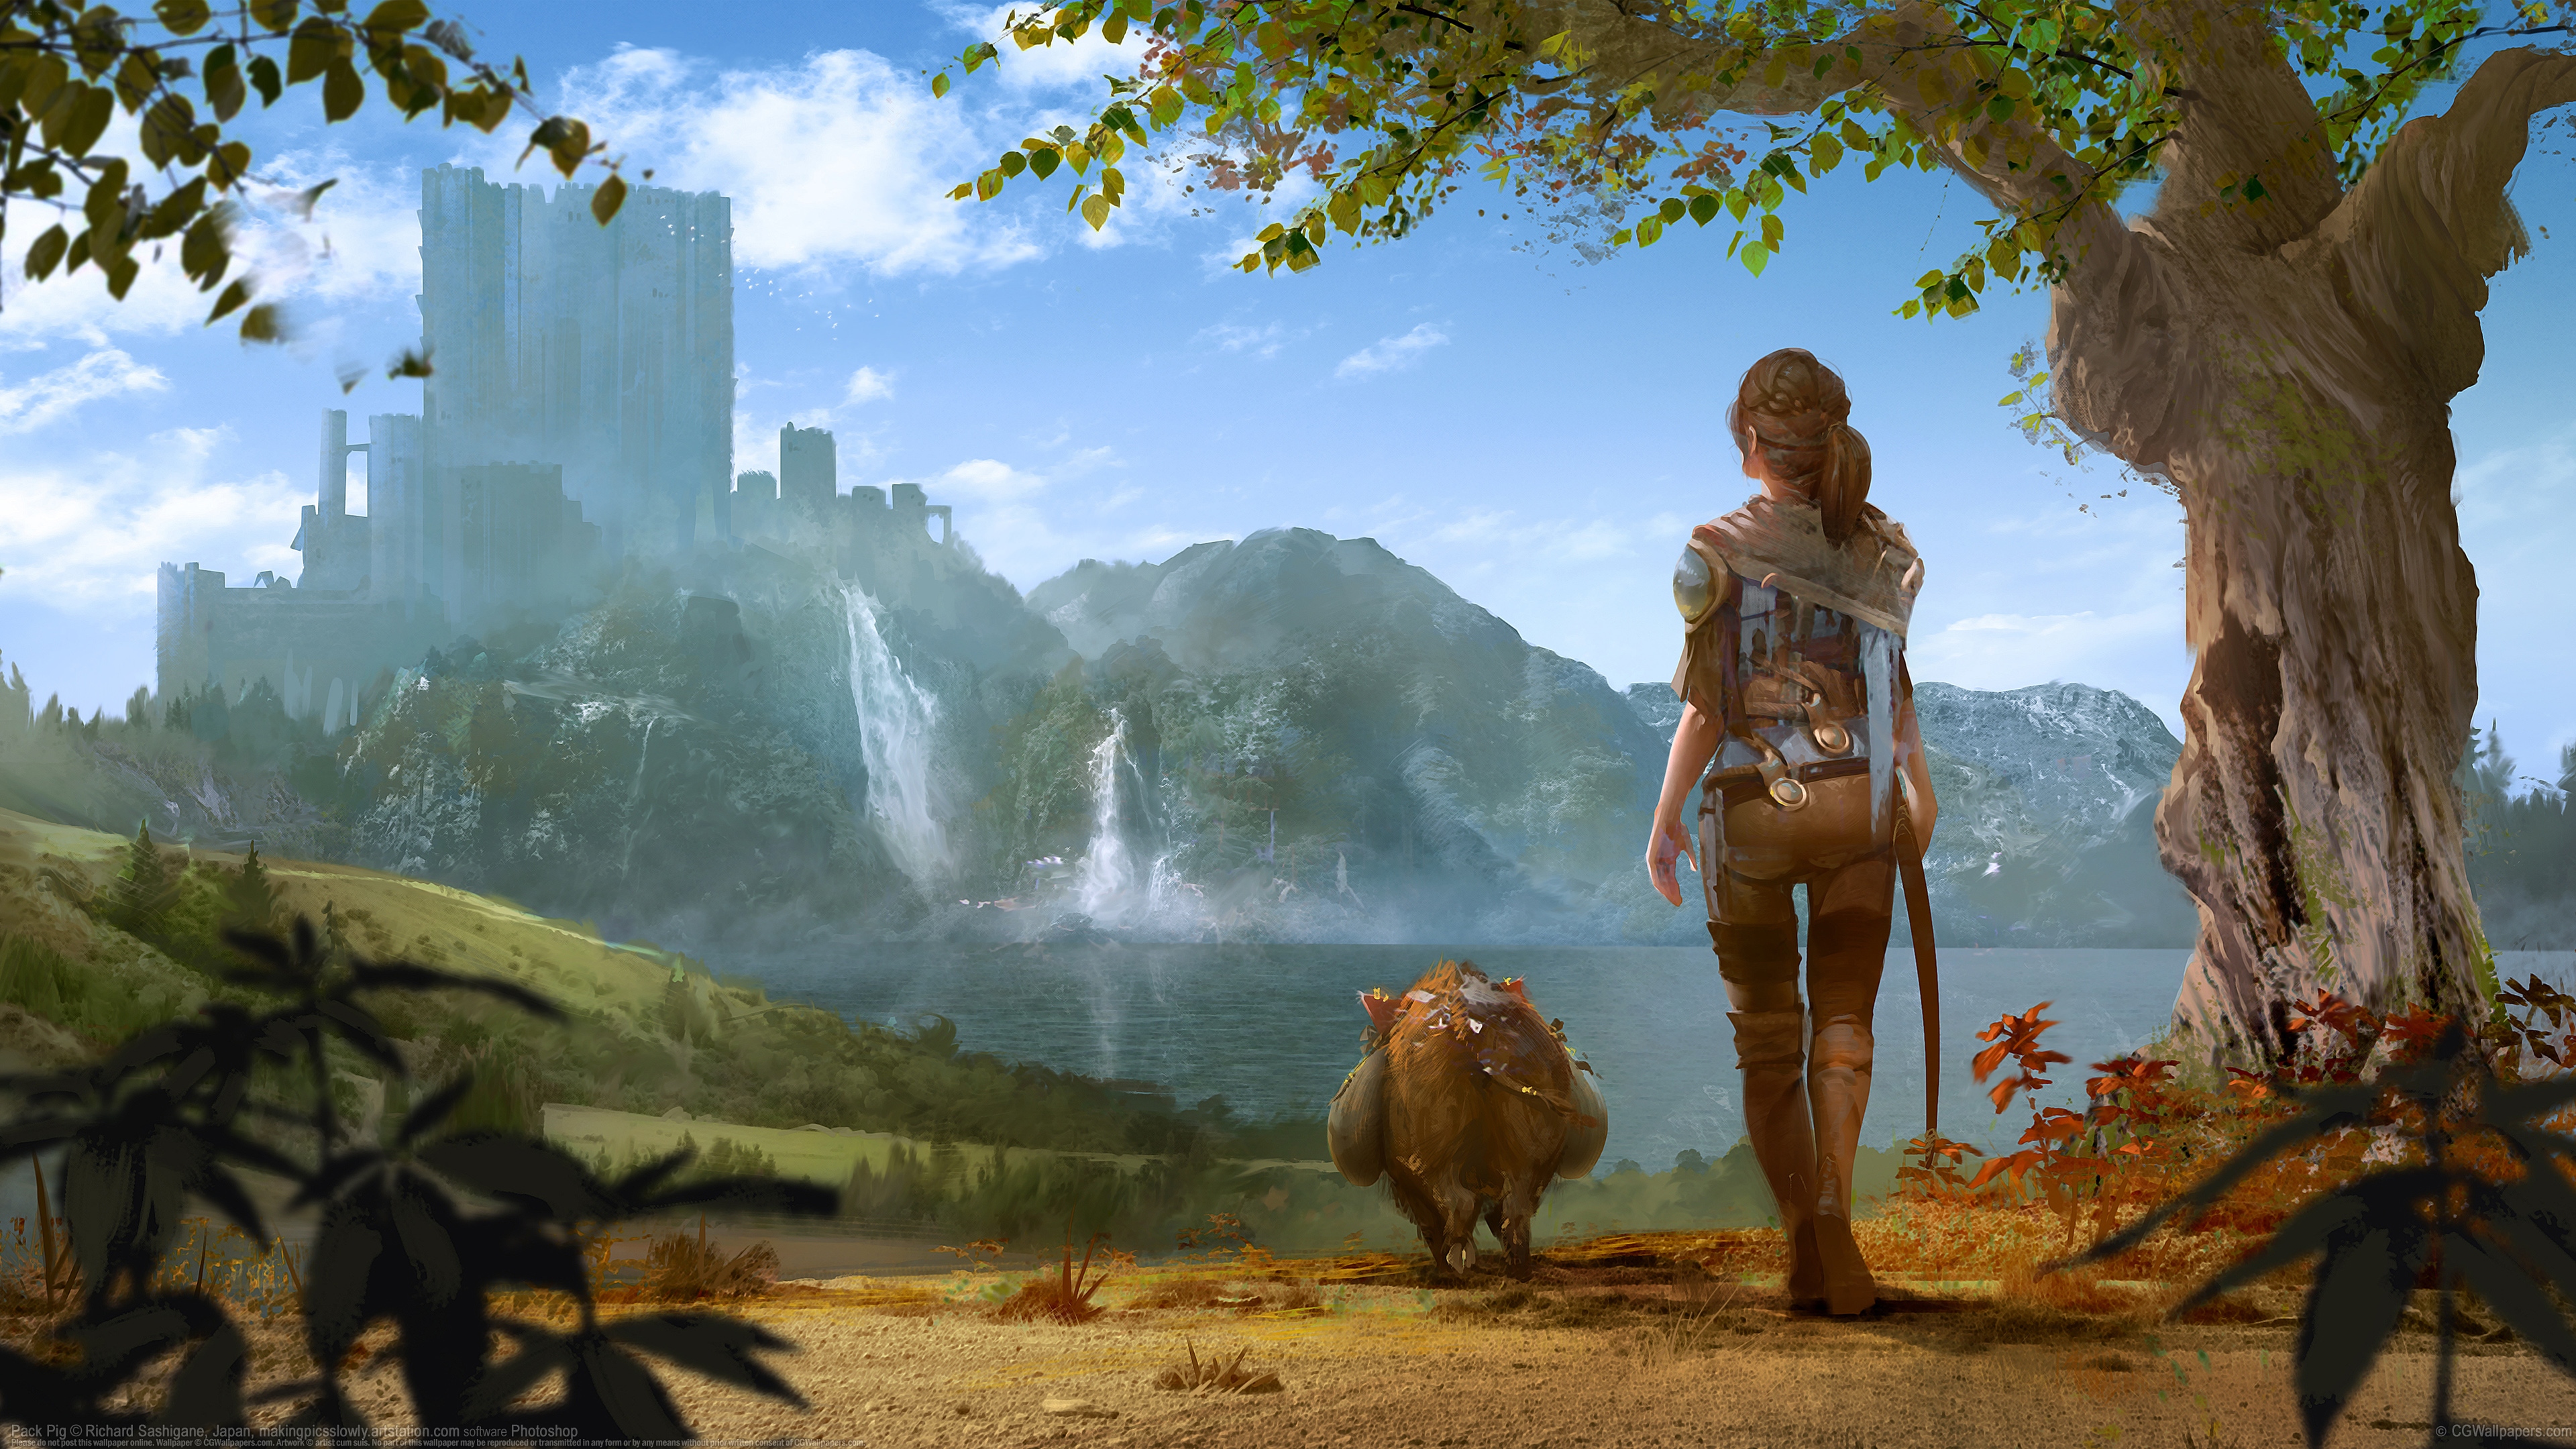 Anime 3840x2160 Girls Avenue back walking artwork far view lake trees castle anime girls looking into the distance